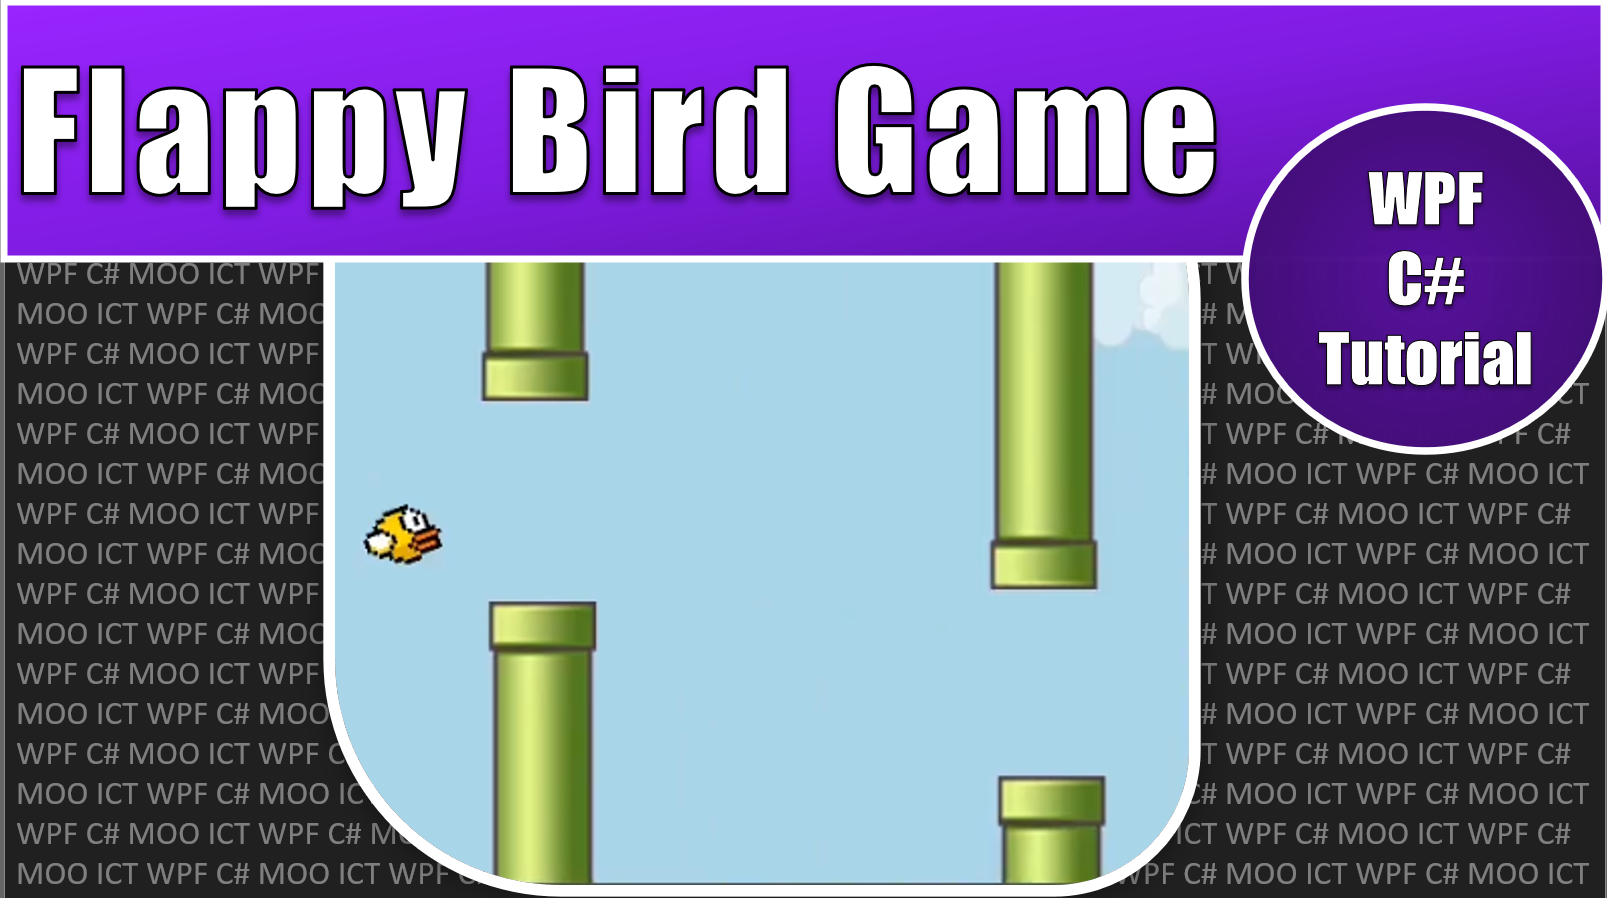 I Need Help With Movement and a Restart Button in Flappy Bird